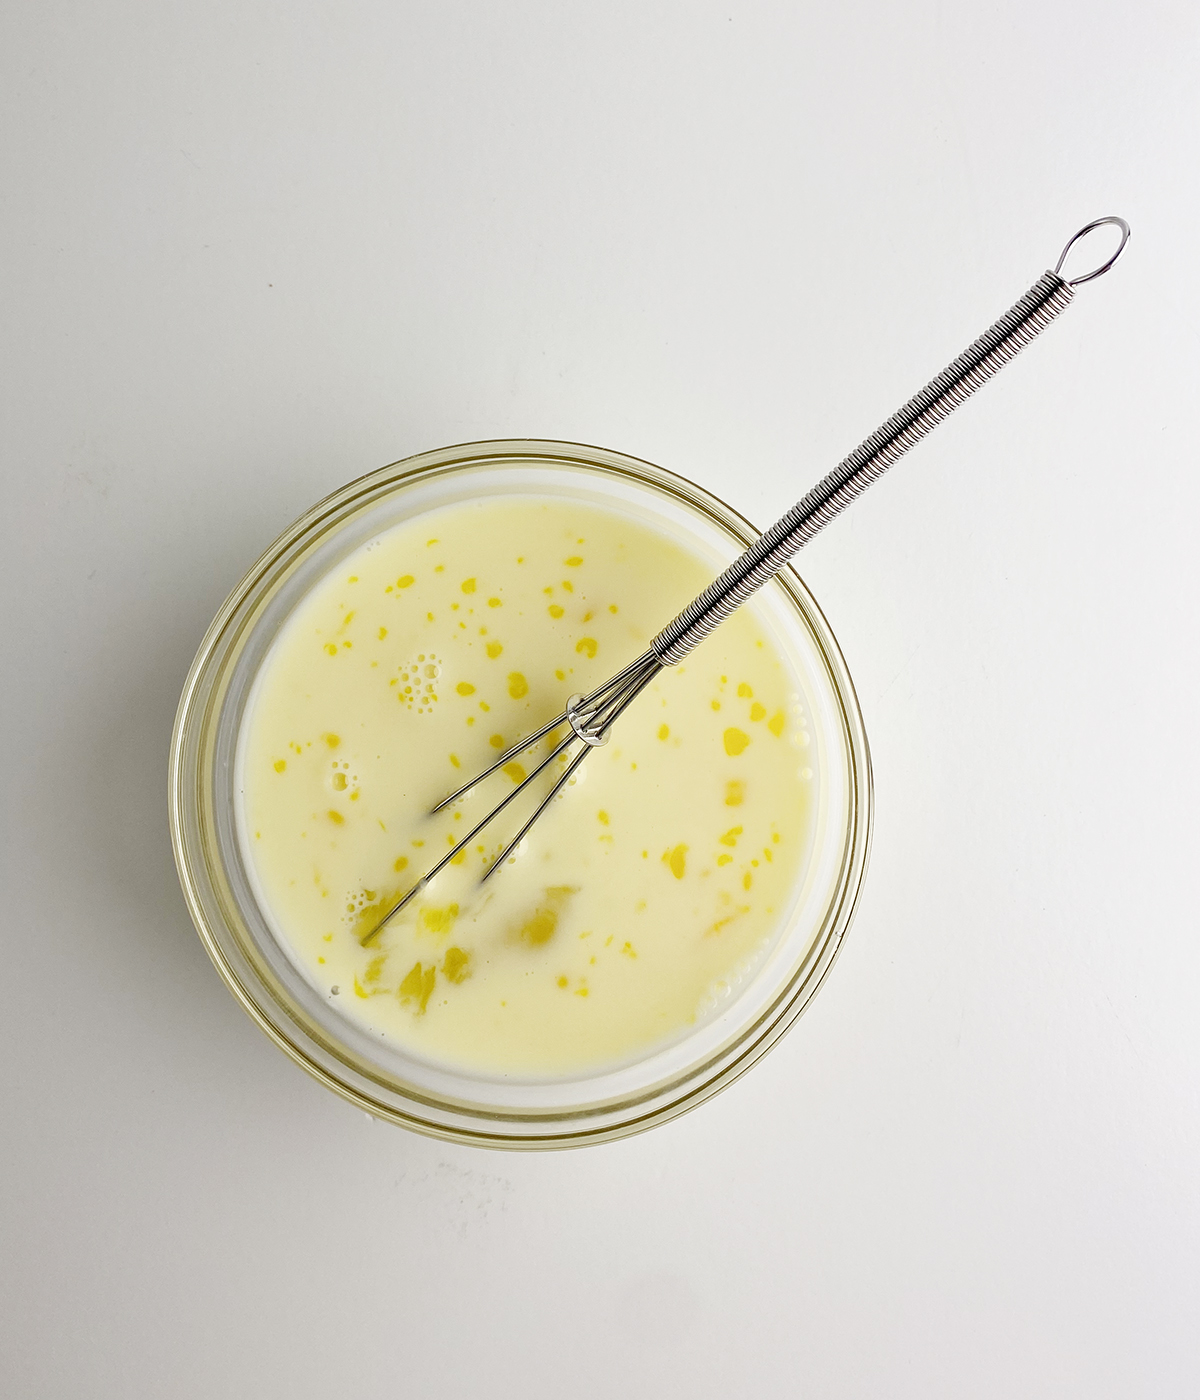 Milk and egg mixture in a bowl with a whisk.